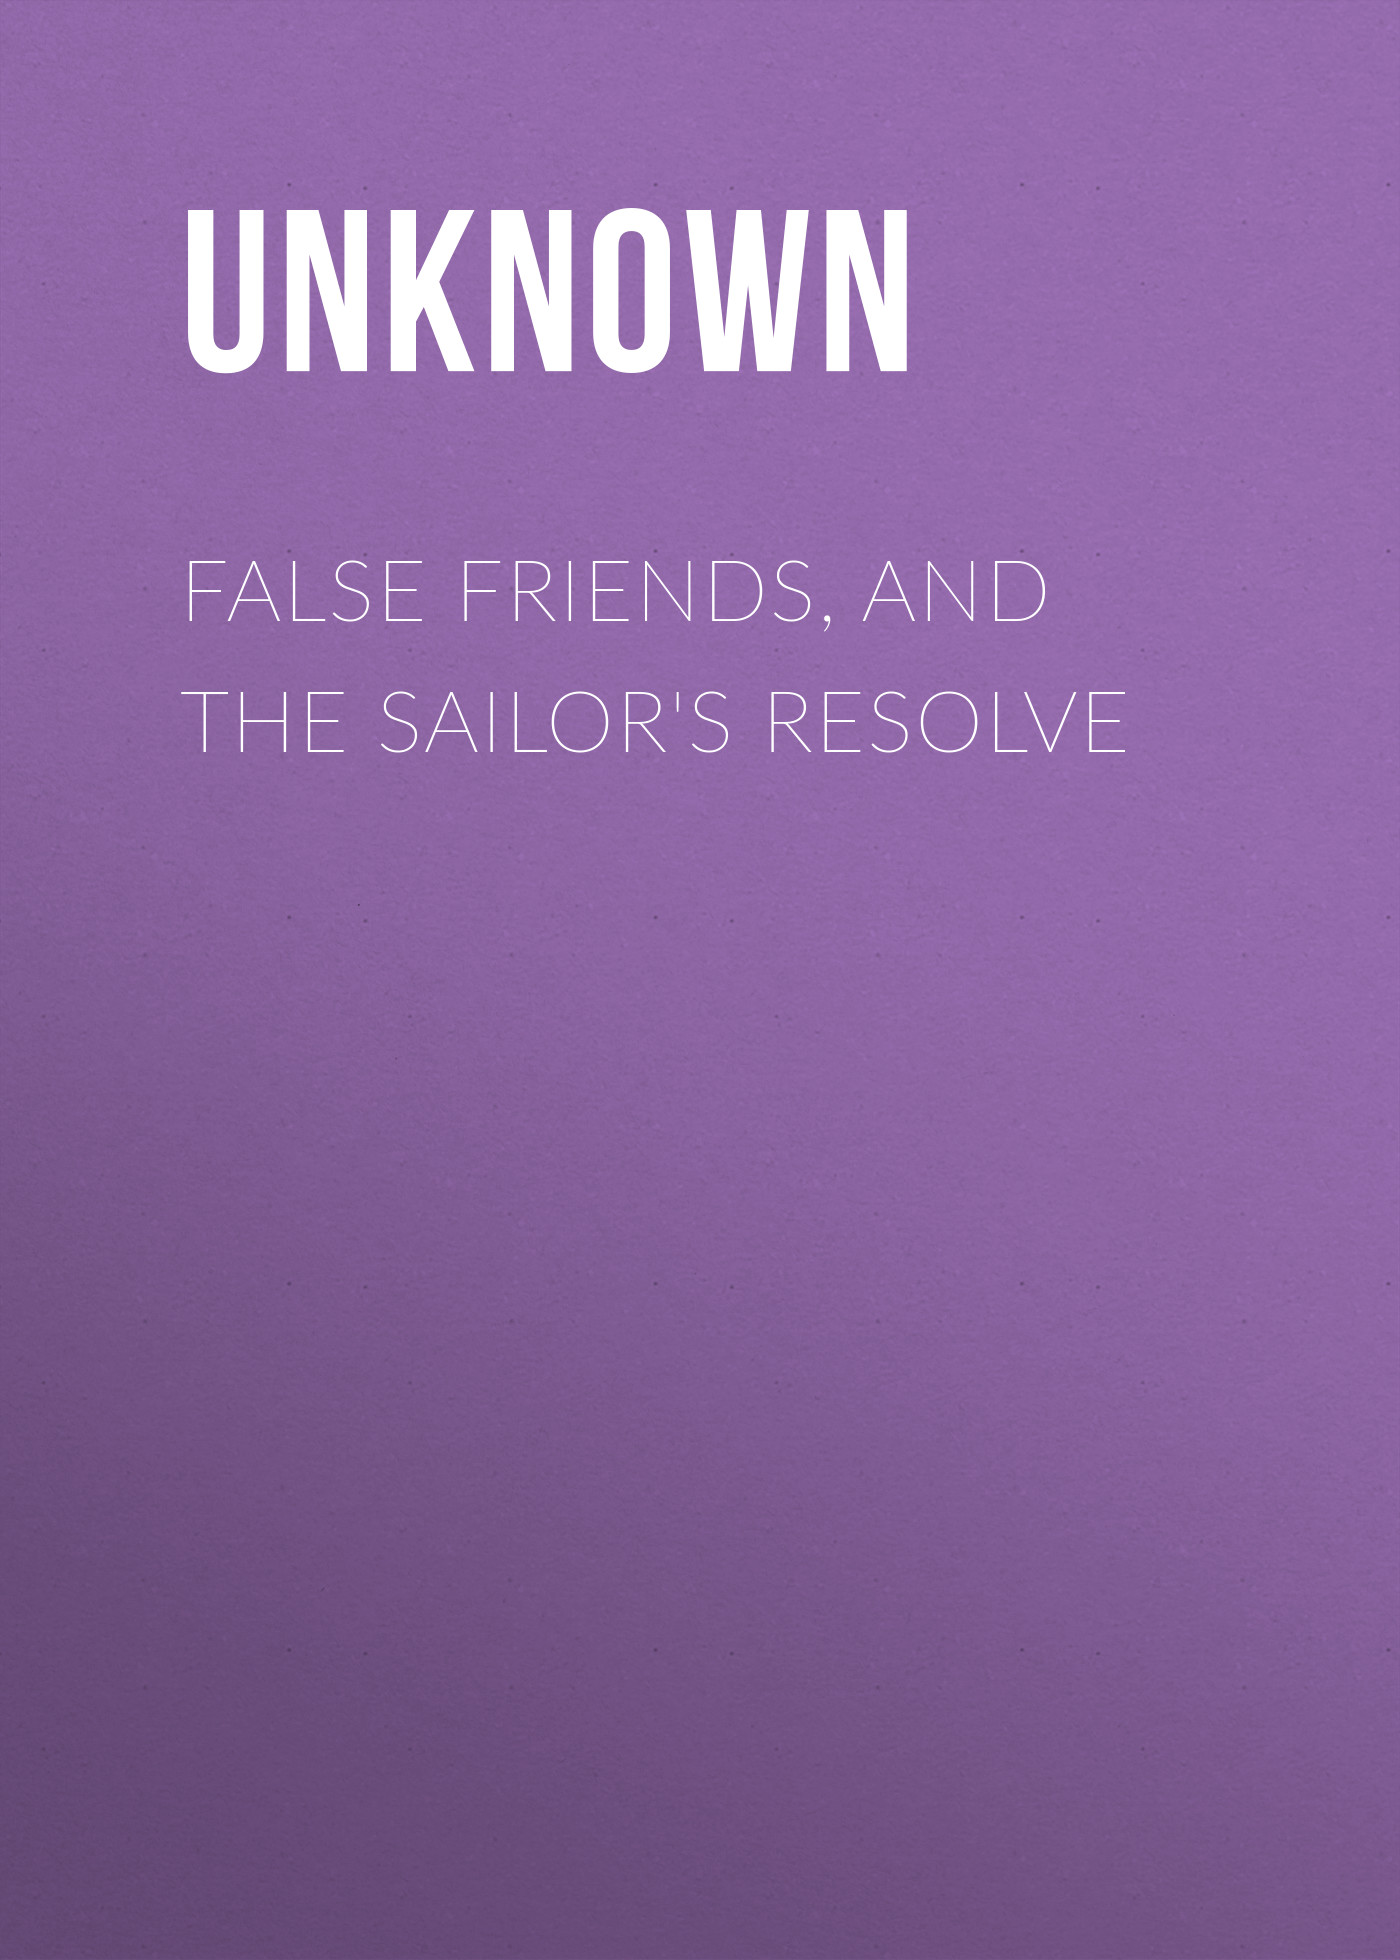 False Friends, and The Sailor's Resolve